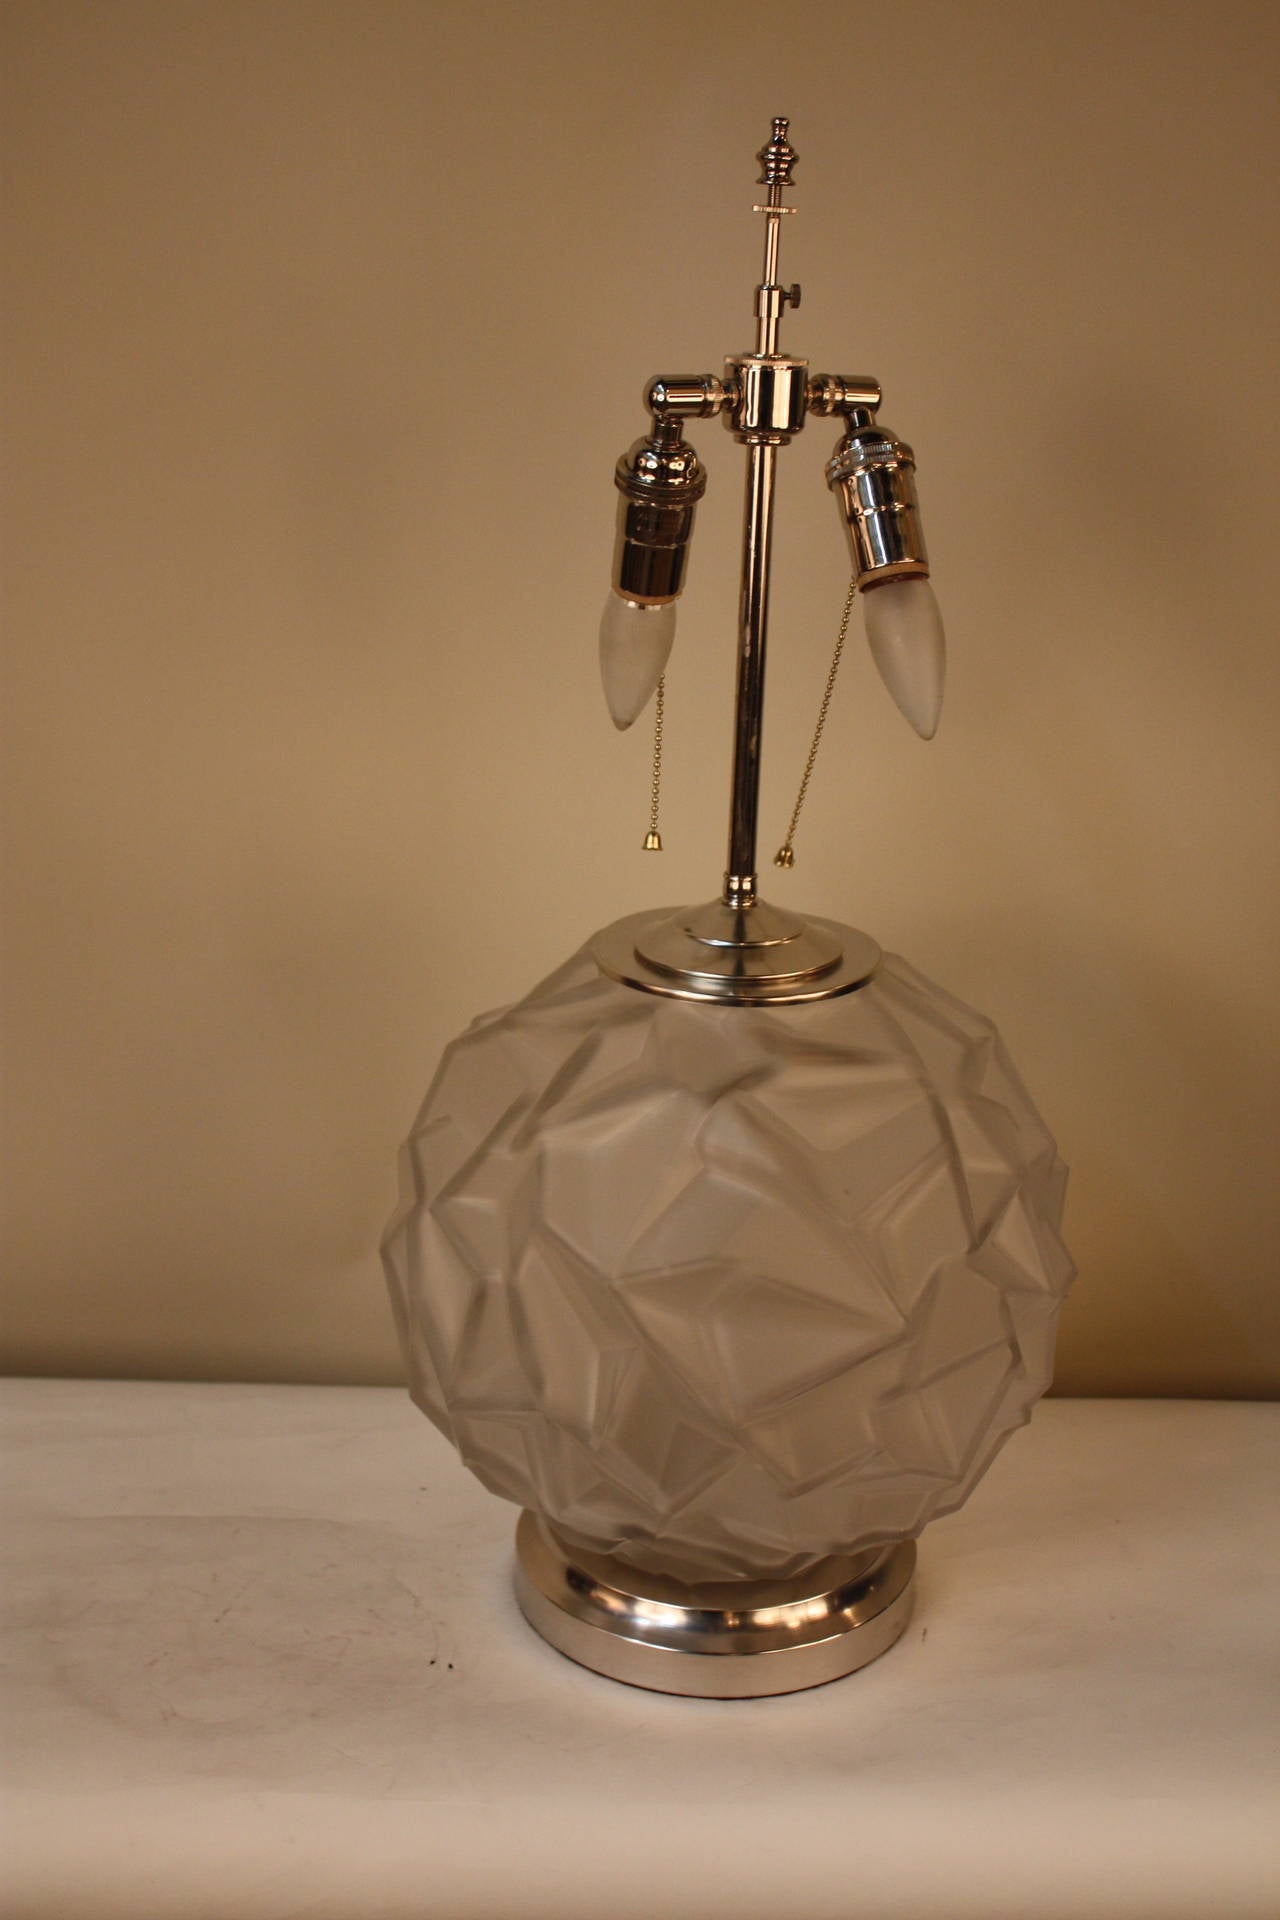 Simple but elegant Frost glass vase with geometric design which has been mounted as a table lamp with nickel base and hardware.